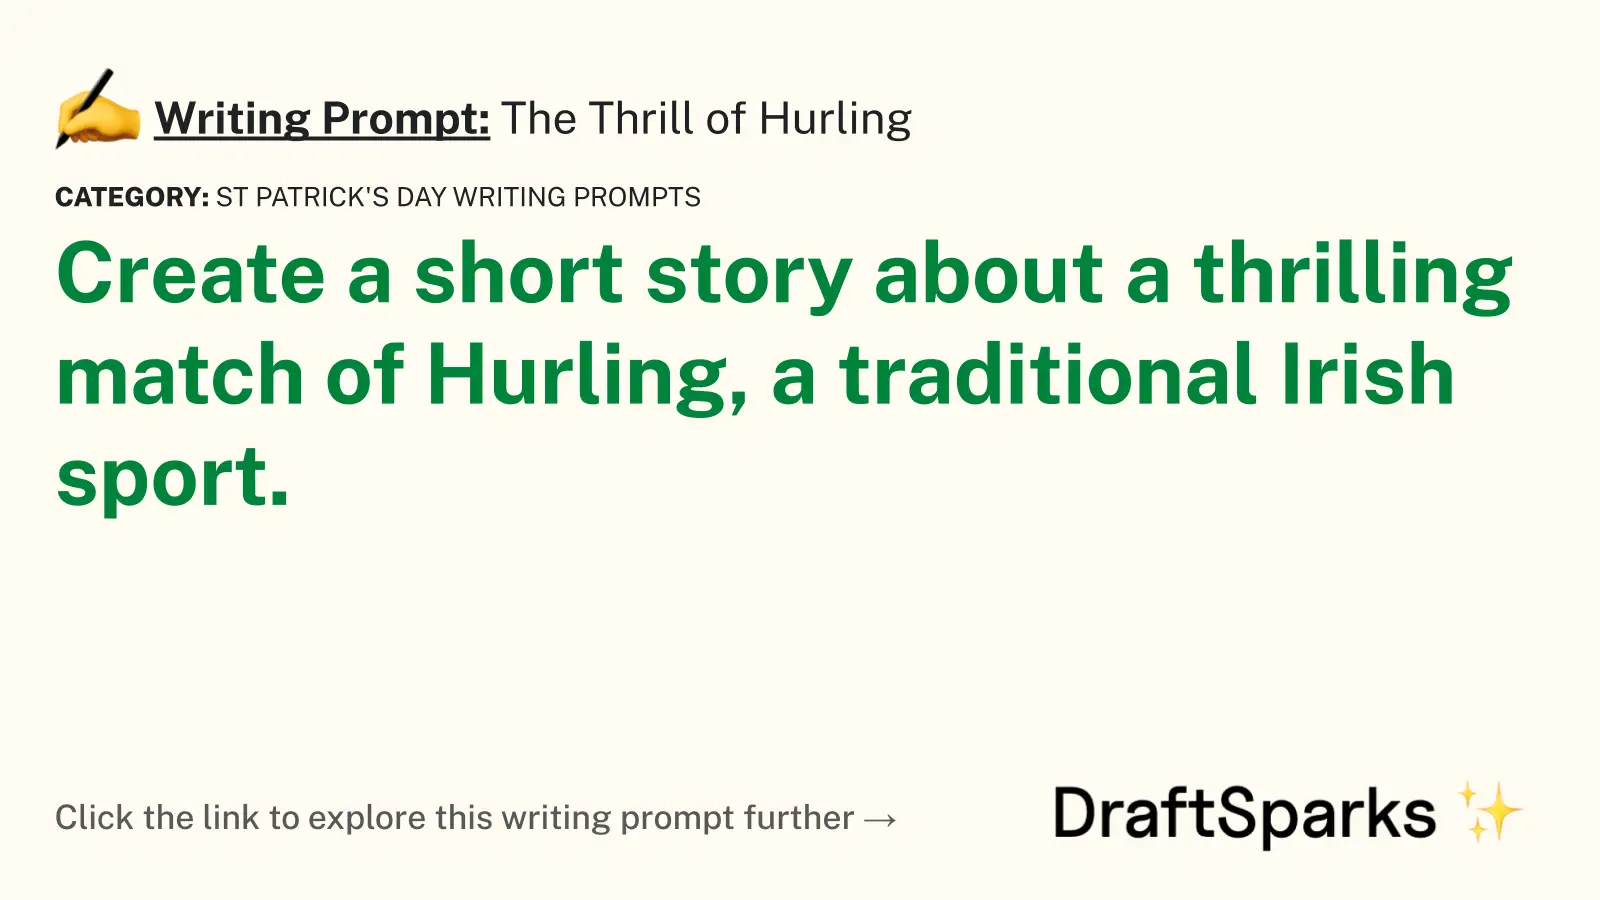 The Thrill of Hurling